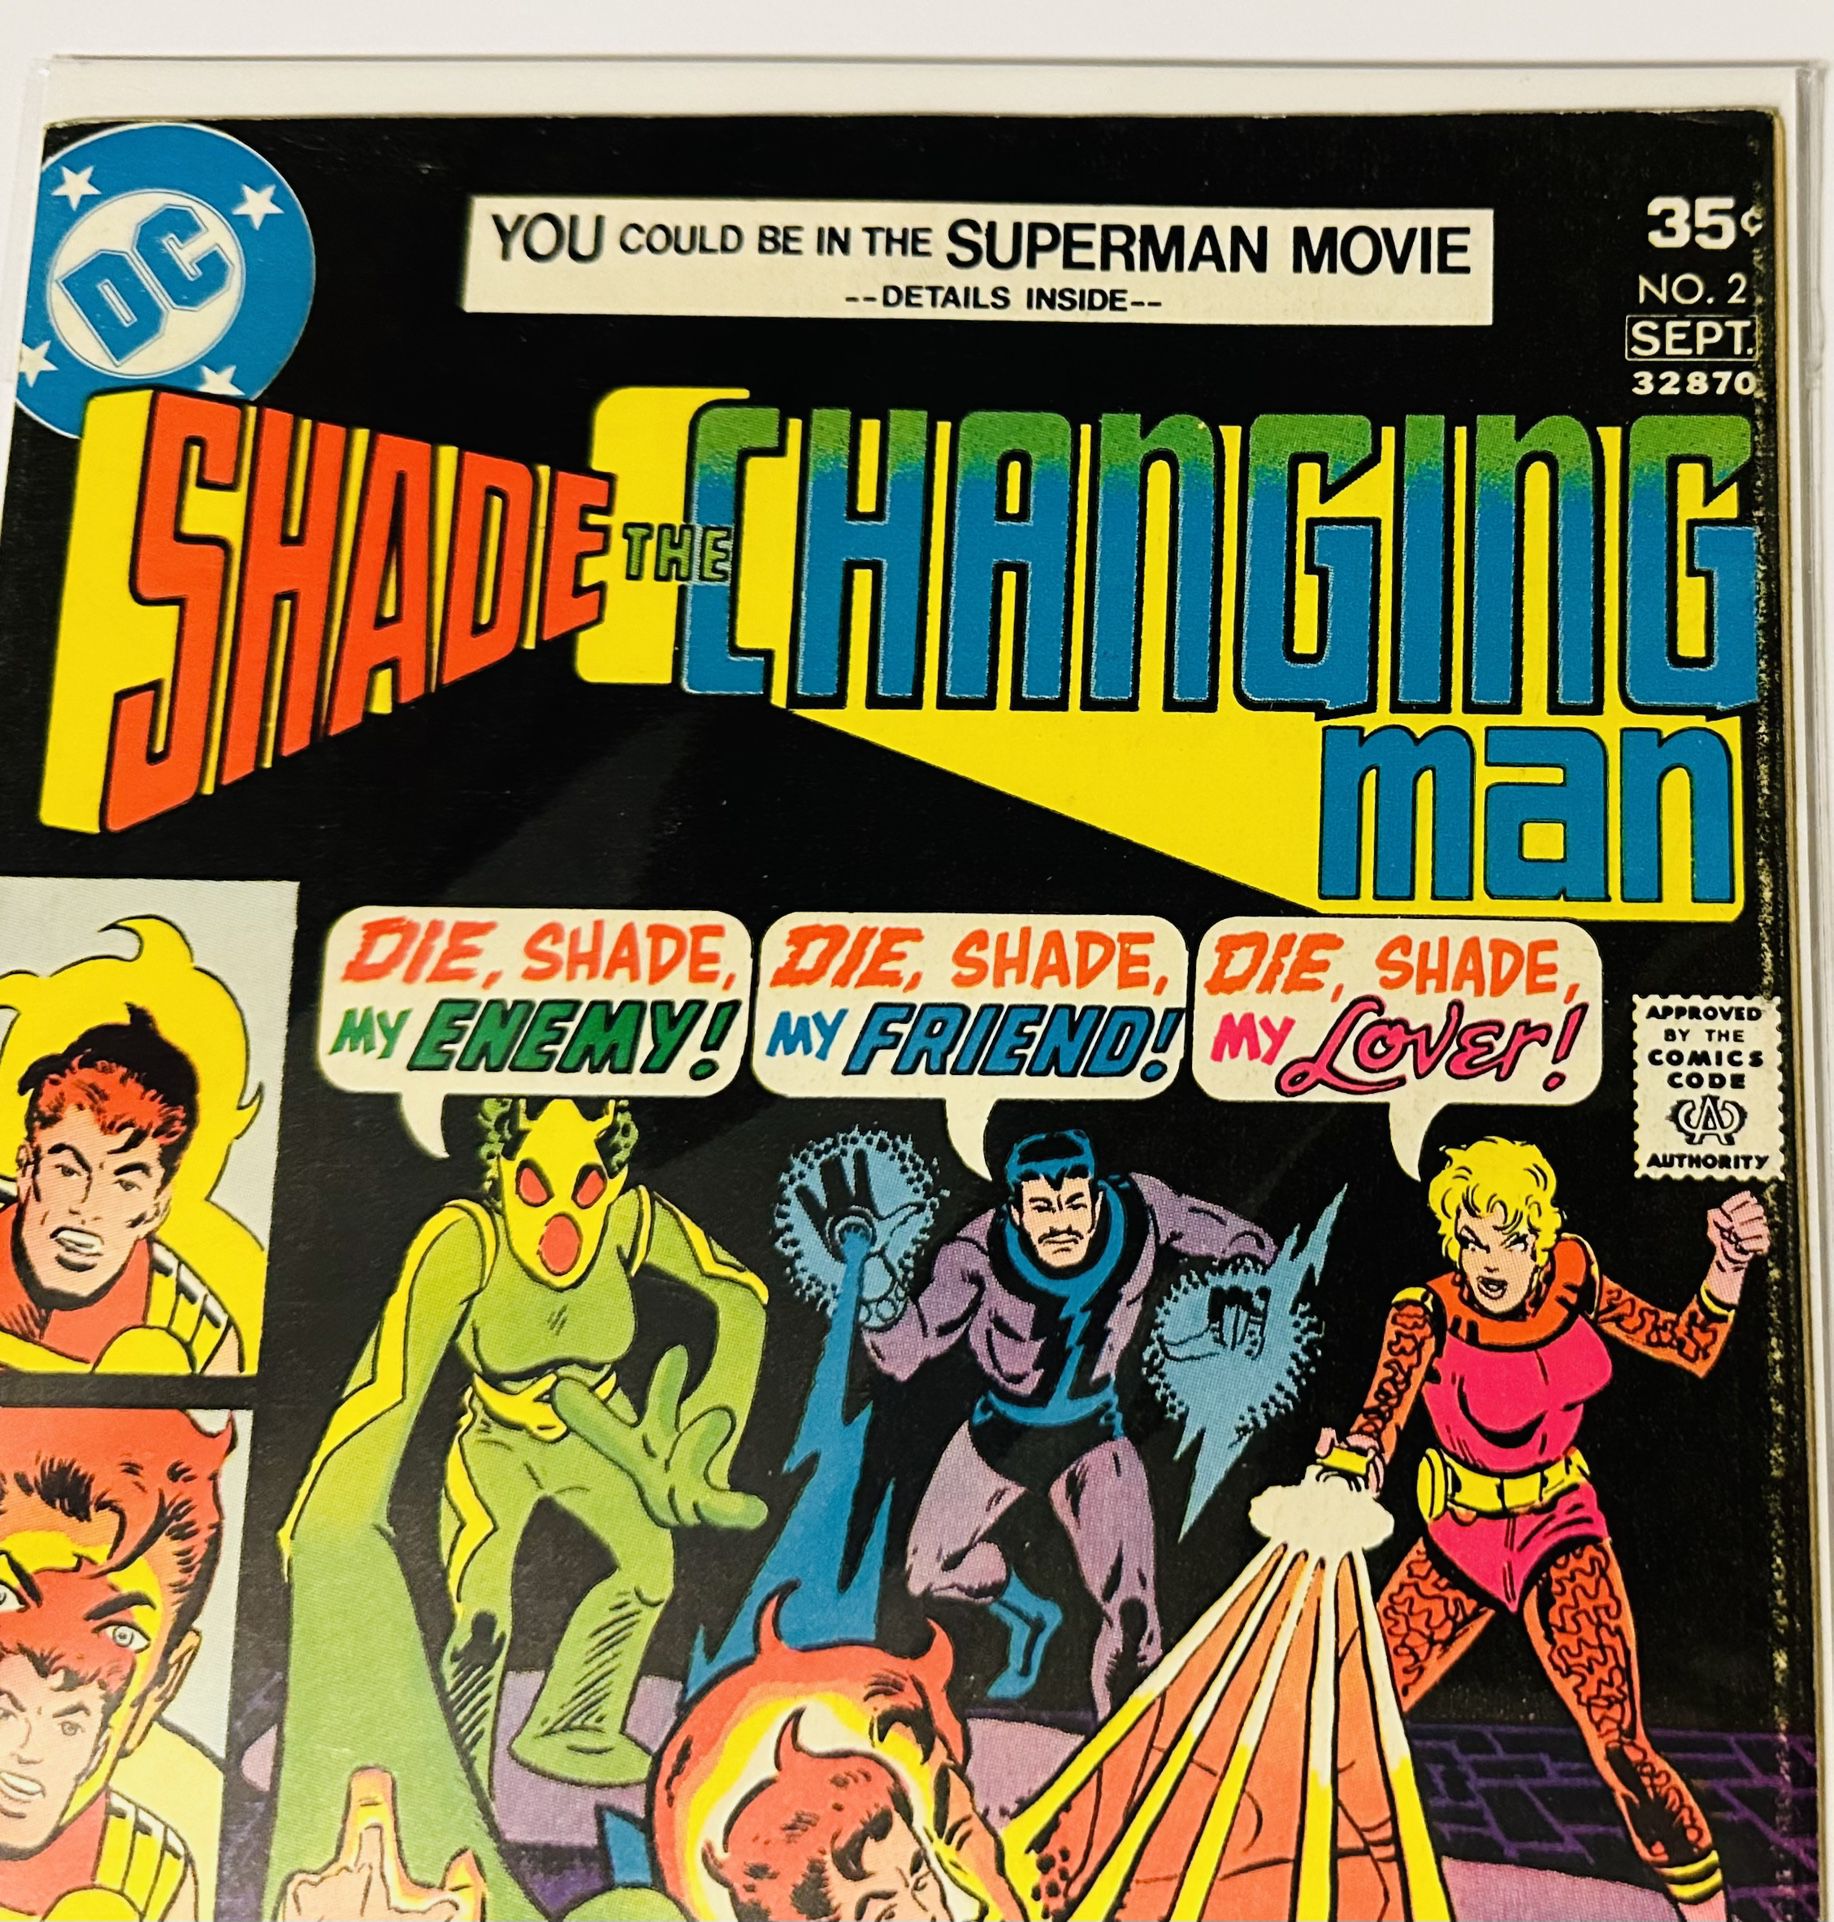 DC COMICS “SHADE,THE CHANGING MAN” #2SEPT WRAPPED IN AN ACID FREE ENVELOPE WITH A HARD CARDBOARD INSERT